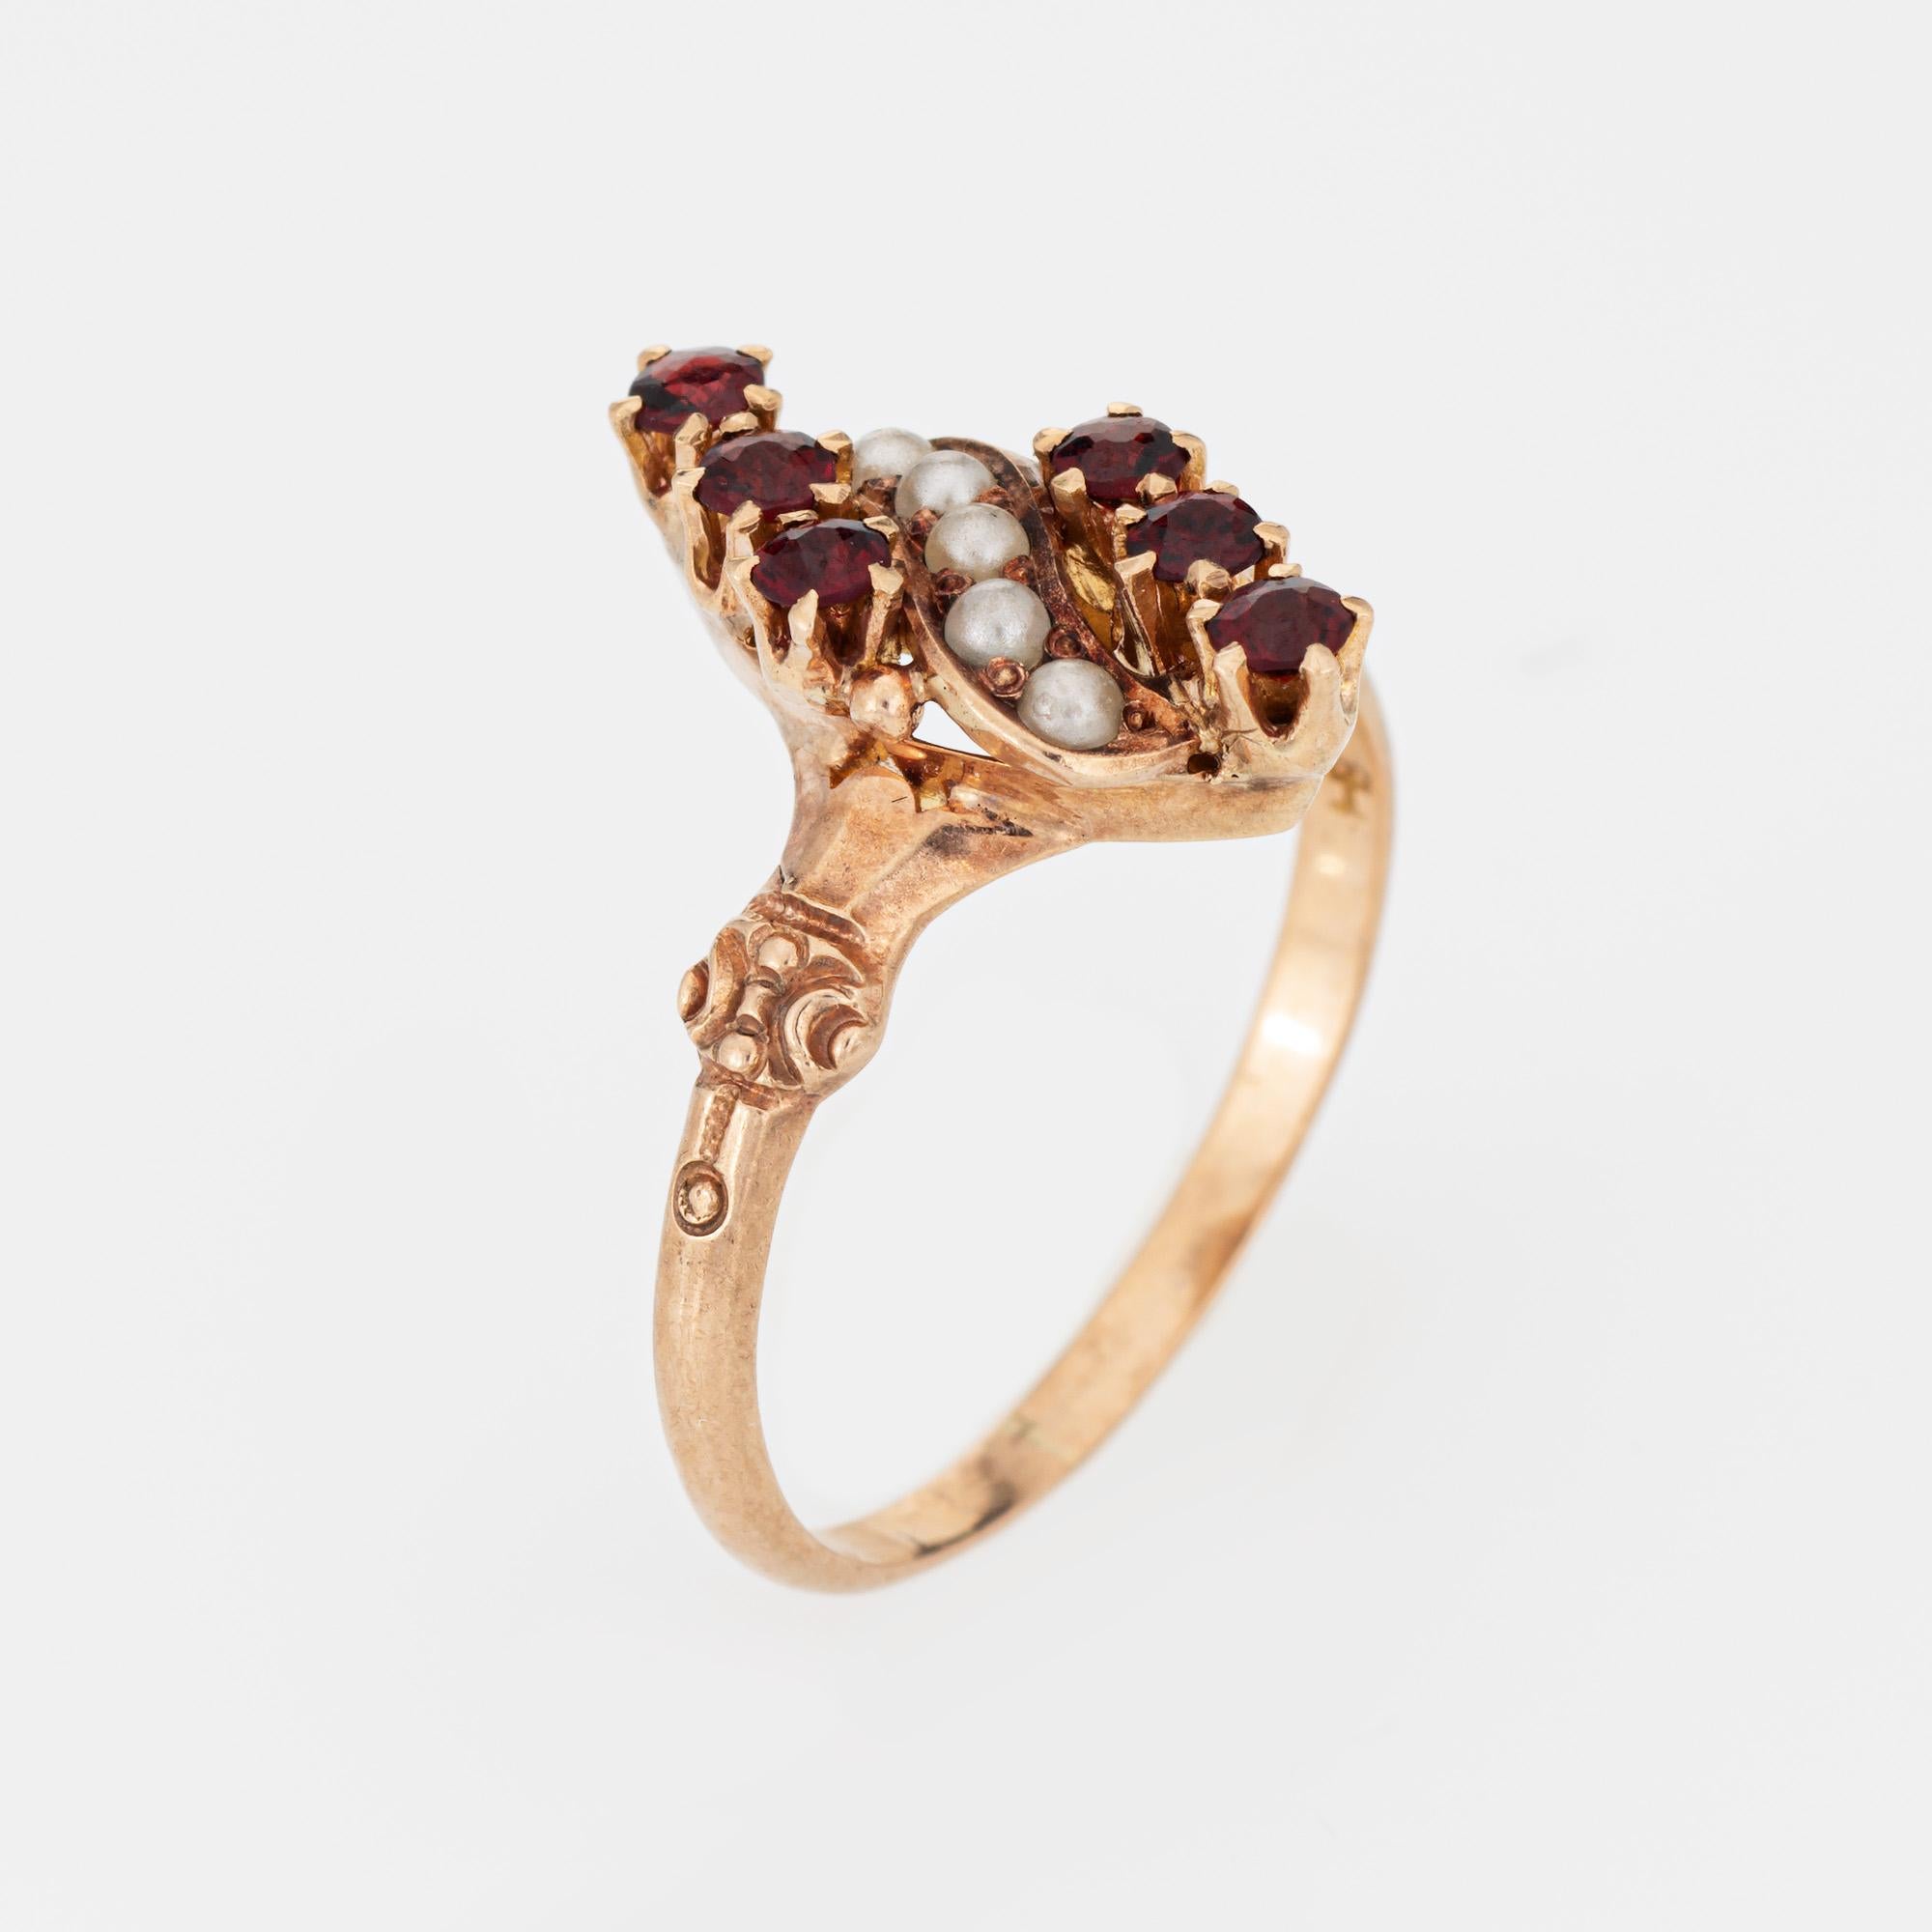 Stylish antique Victorian garnet & seed pearl ring (circa 1880s to 1900s) crafted in 14 karat rose gold. 

Six garnets measure 2mm each, accented with 1.5mm seed pearls. The garnets are in good condition and free or cracks or chips (light surface